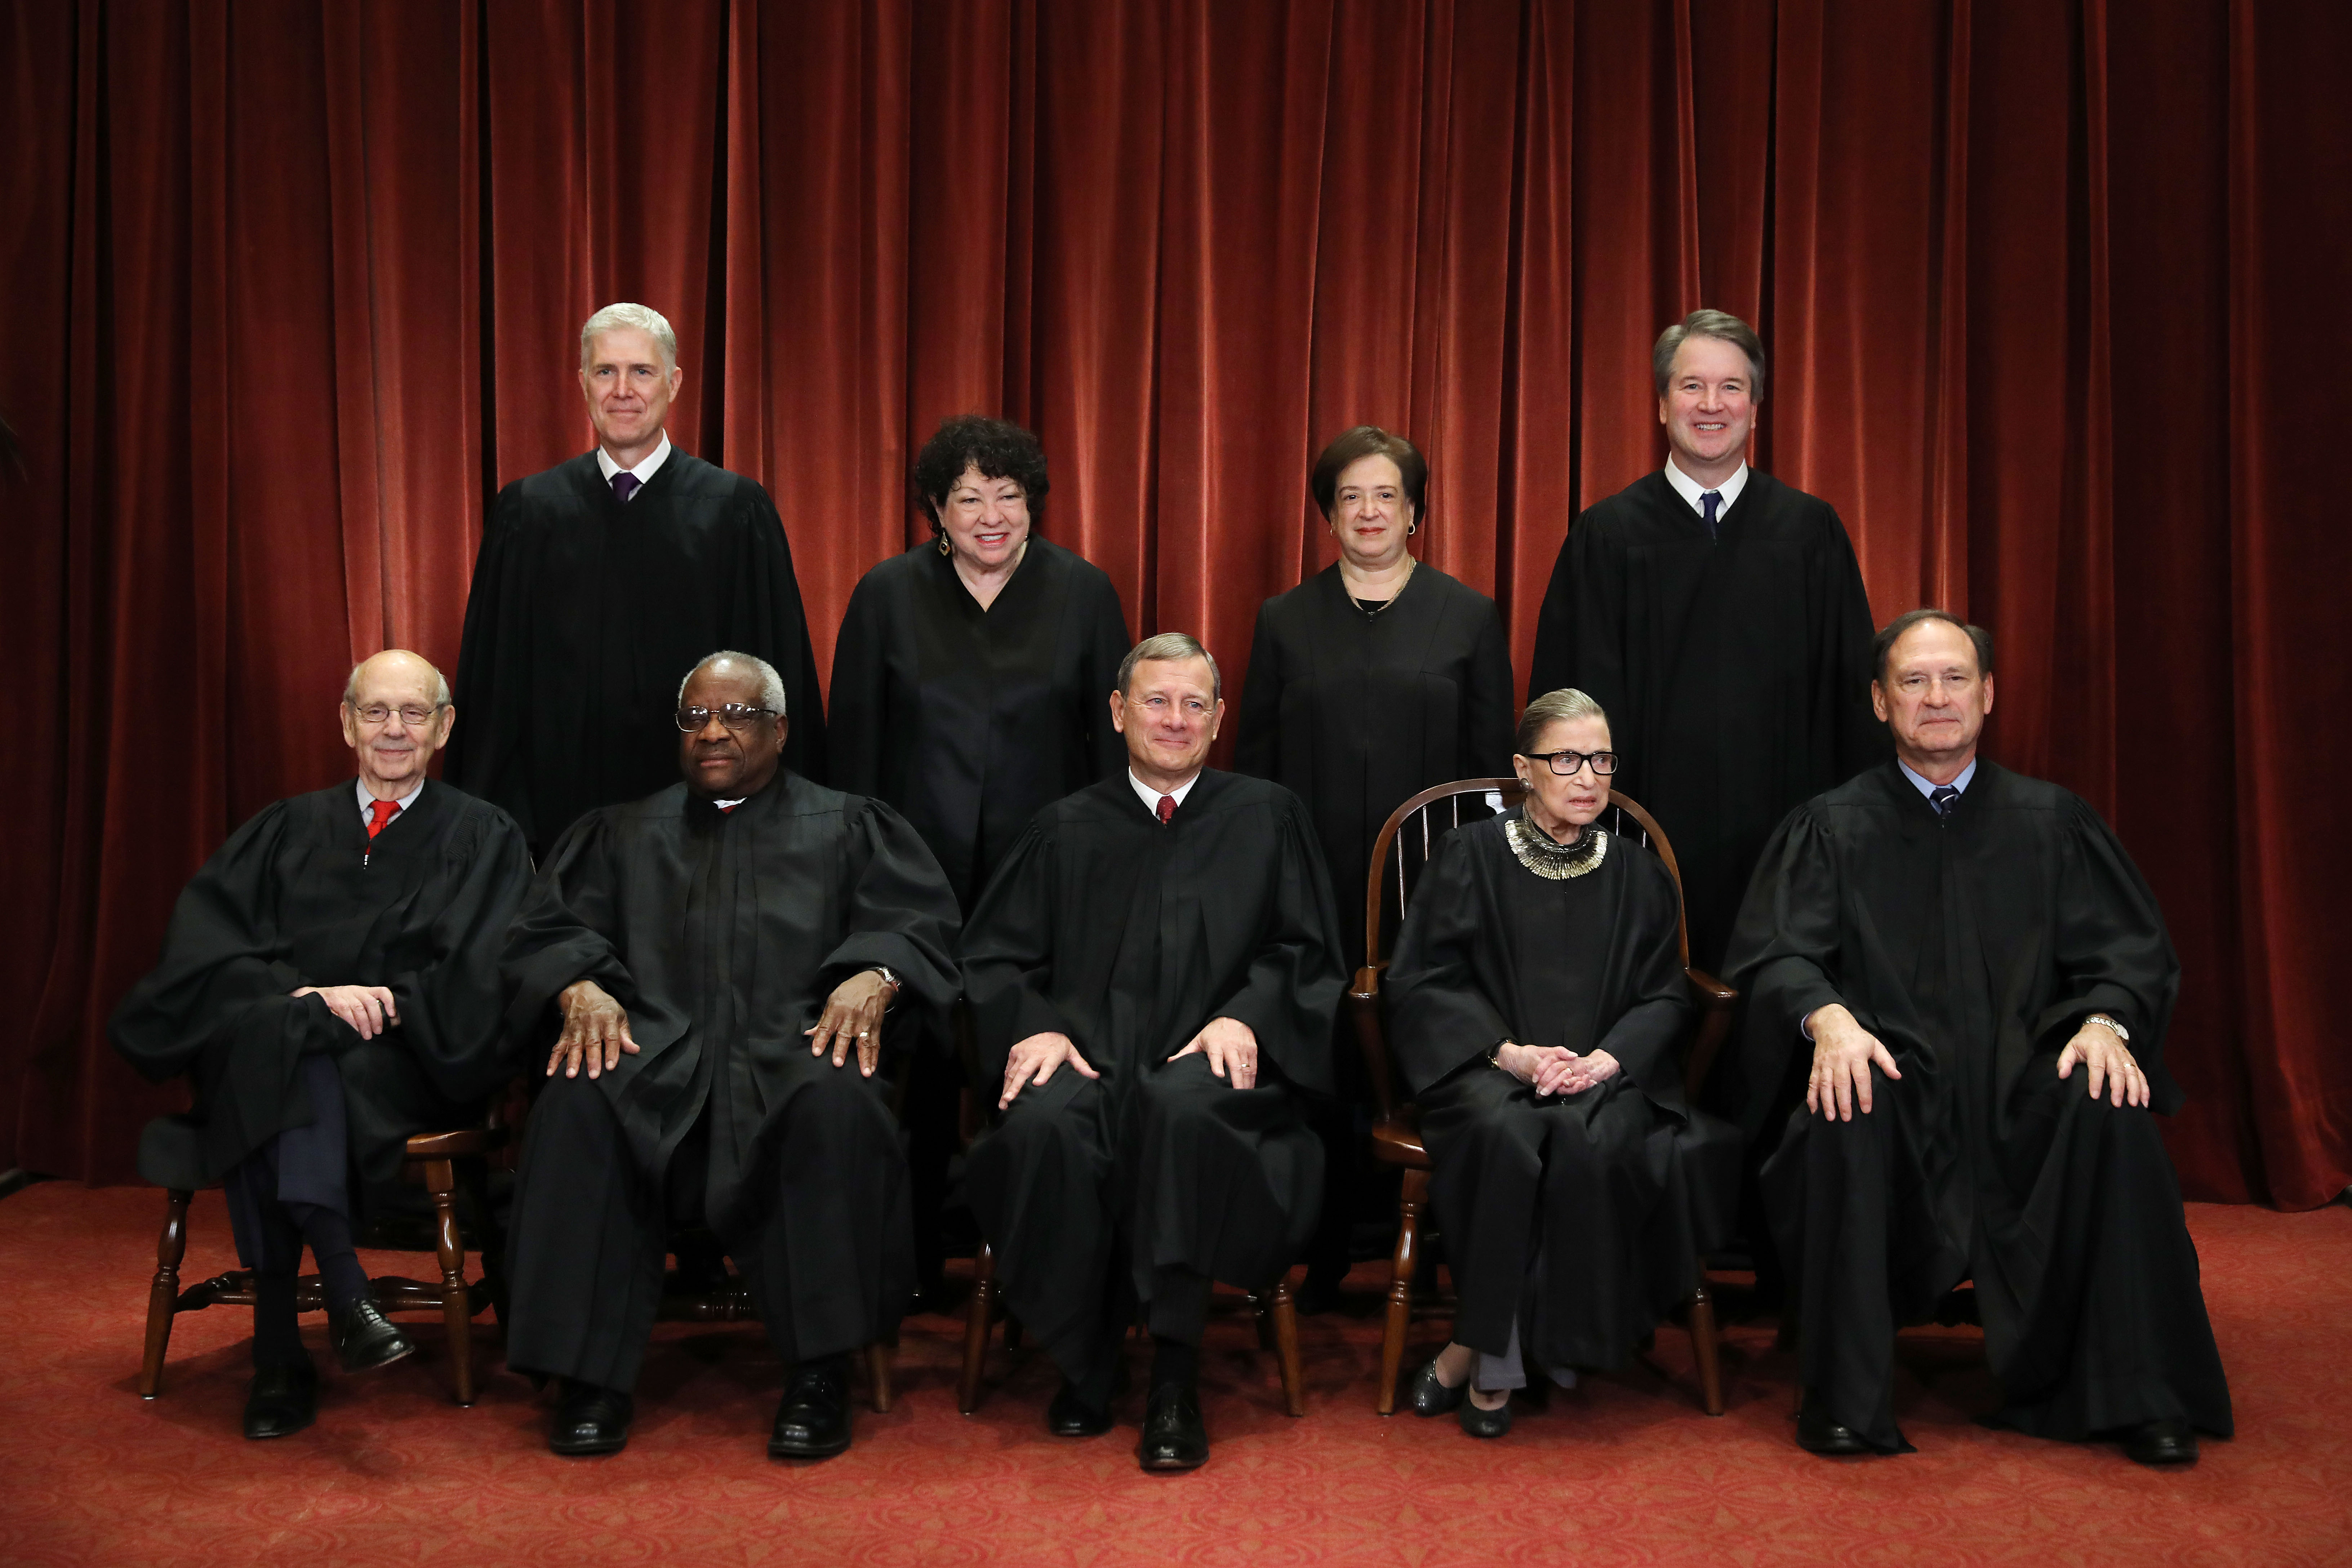 The justices of the Supreme Court pose for their official portrait on November 30, 2018. (Photo by Chip Somodevilla/Getty Images)